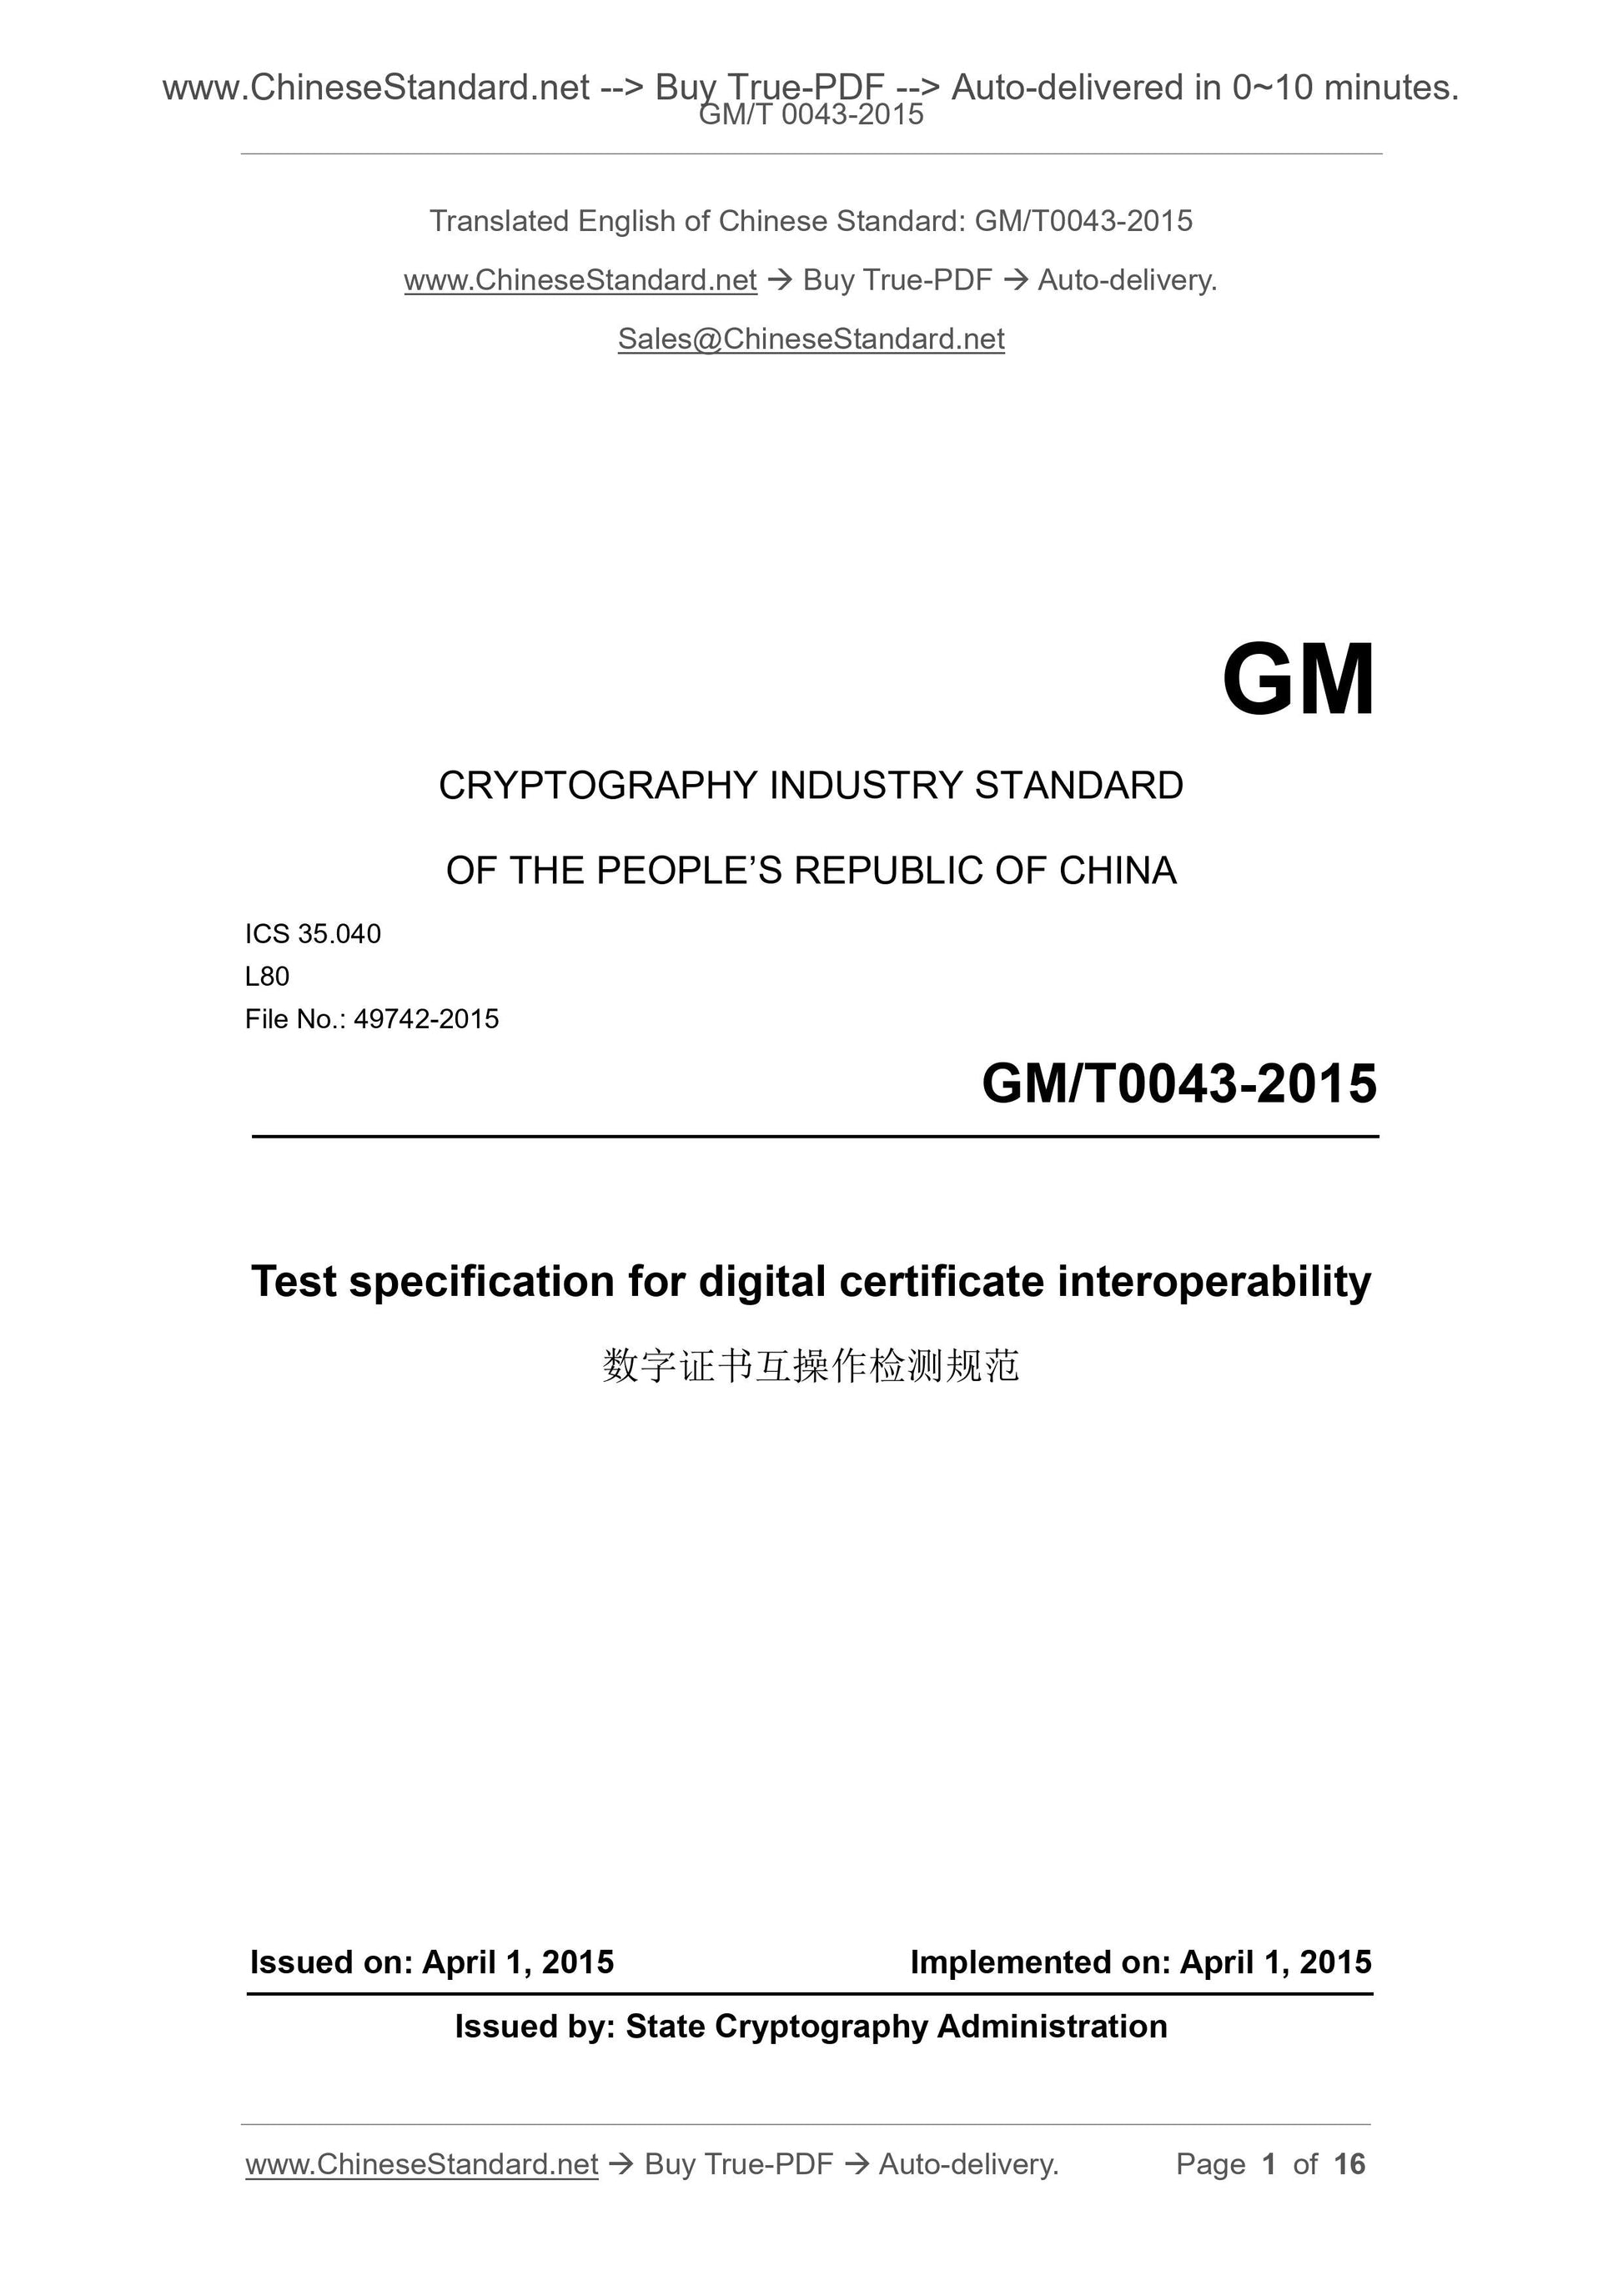 GM/T 0043-2015 Page 1